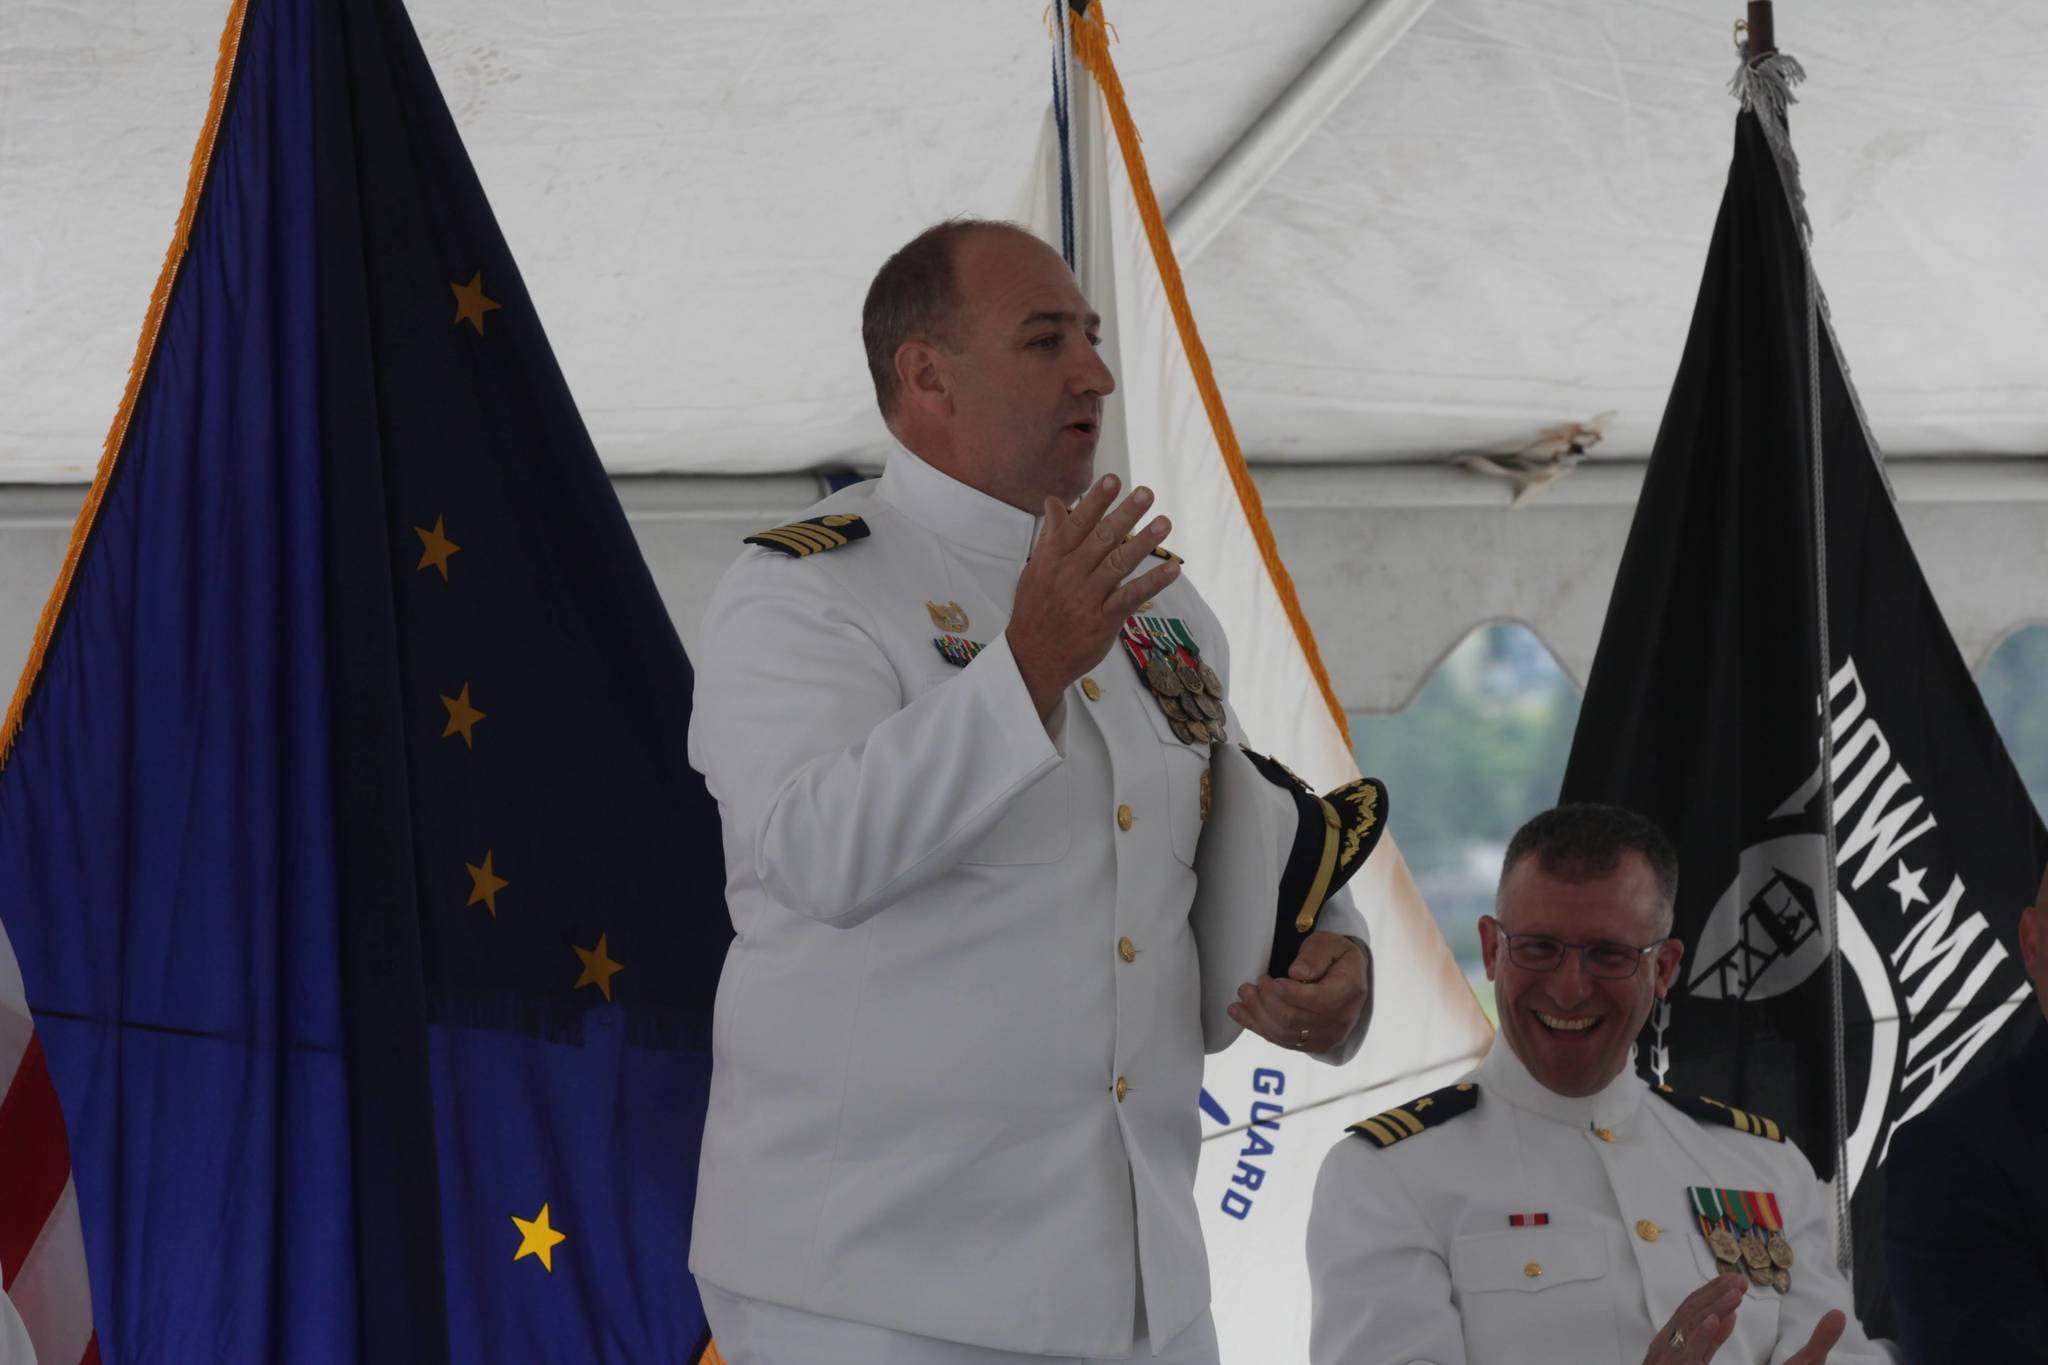 Capt. Stephen J. White, Sector Juneau’s outgoing commander, thanks members of Sector Juneau during a change of command ceremony at the station on July 7, 2021. (Michael S. Lockett / Juneau Empire)